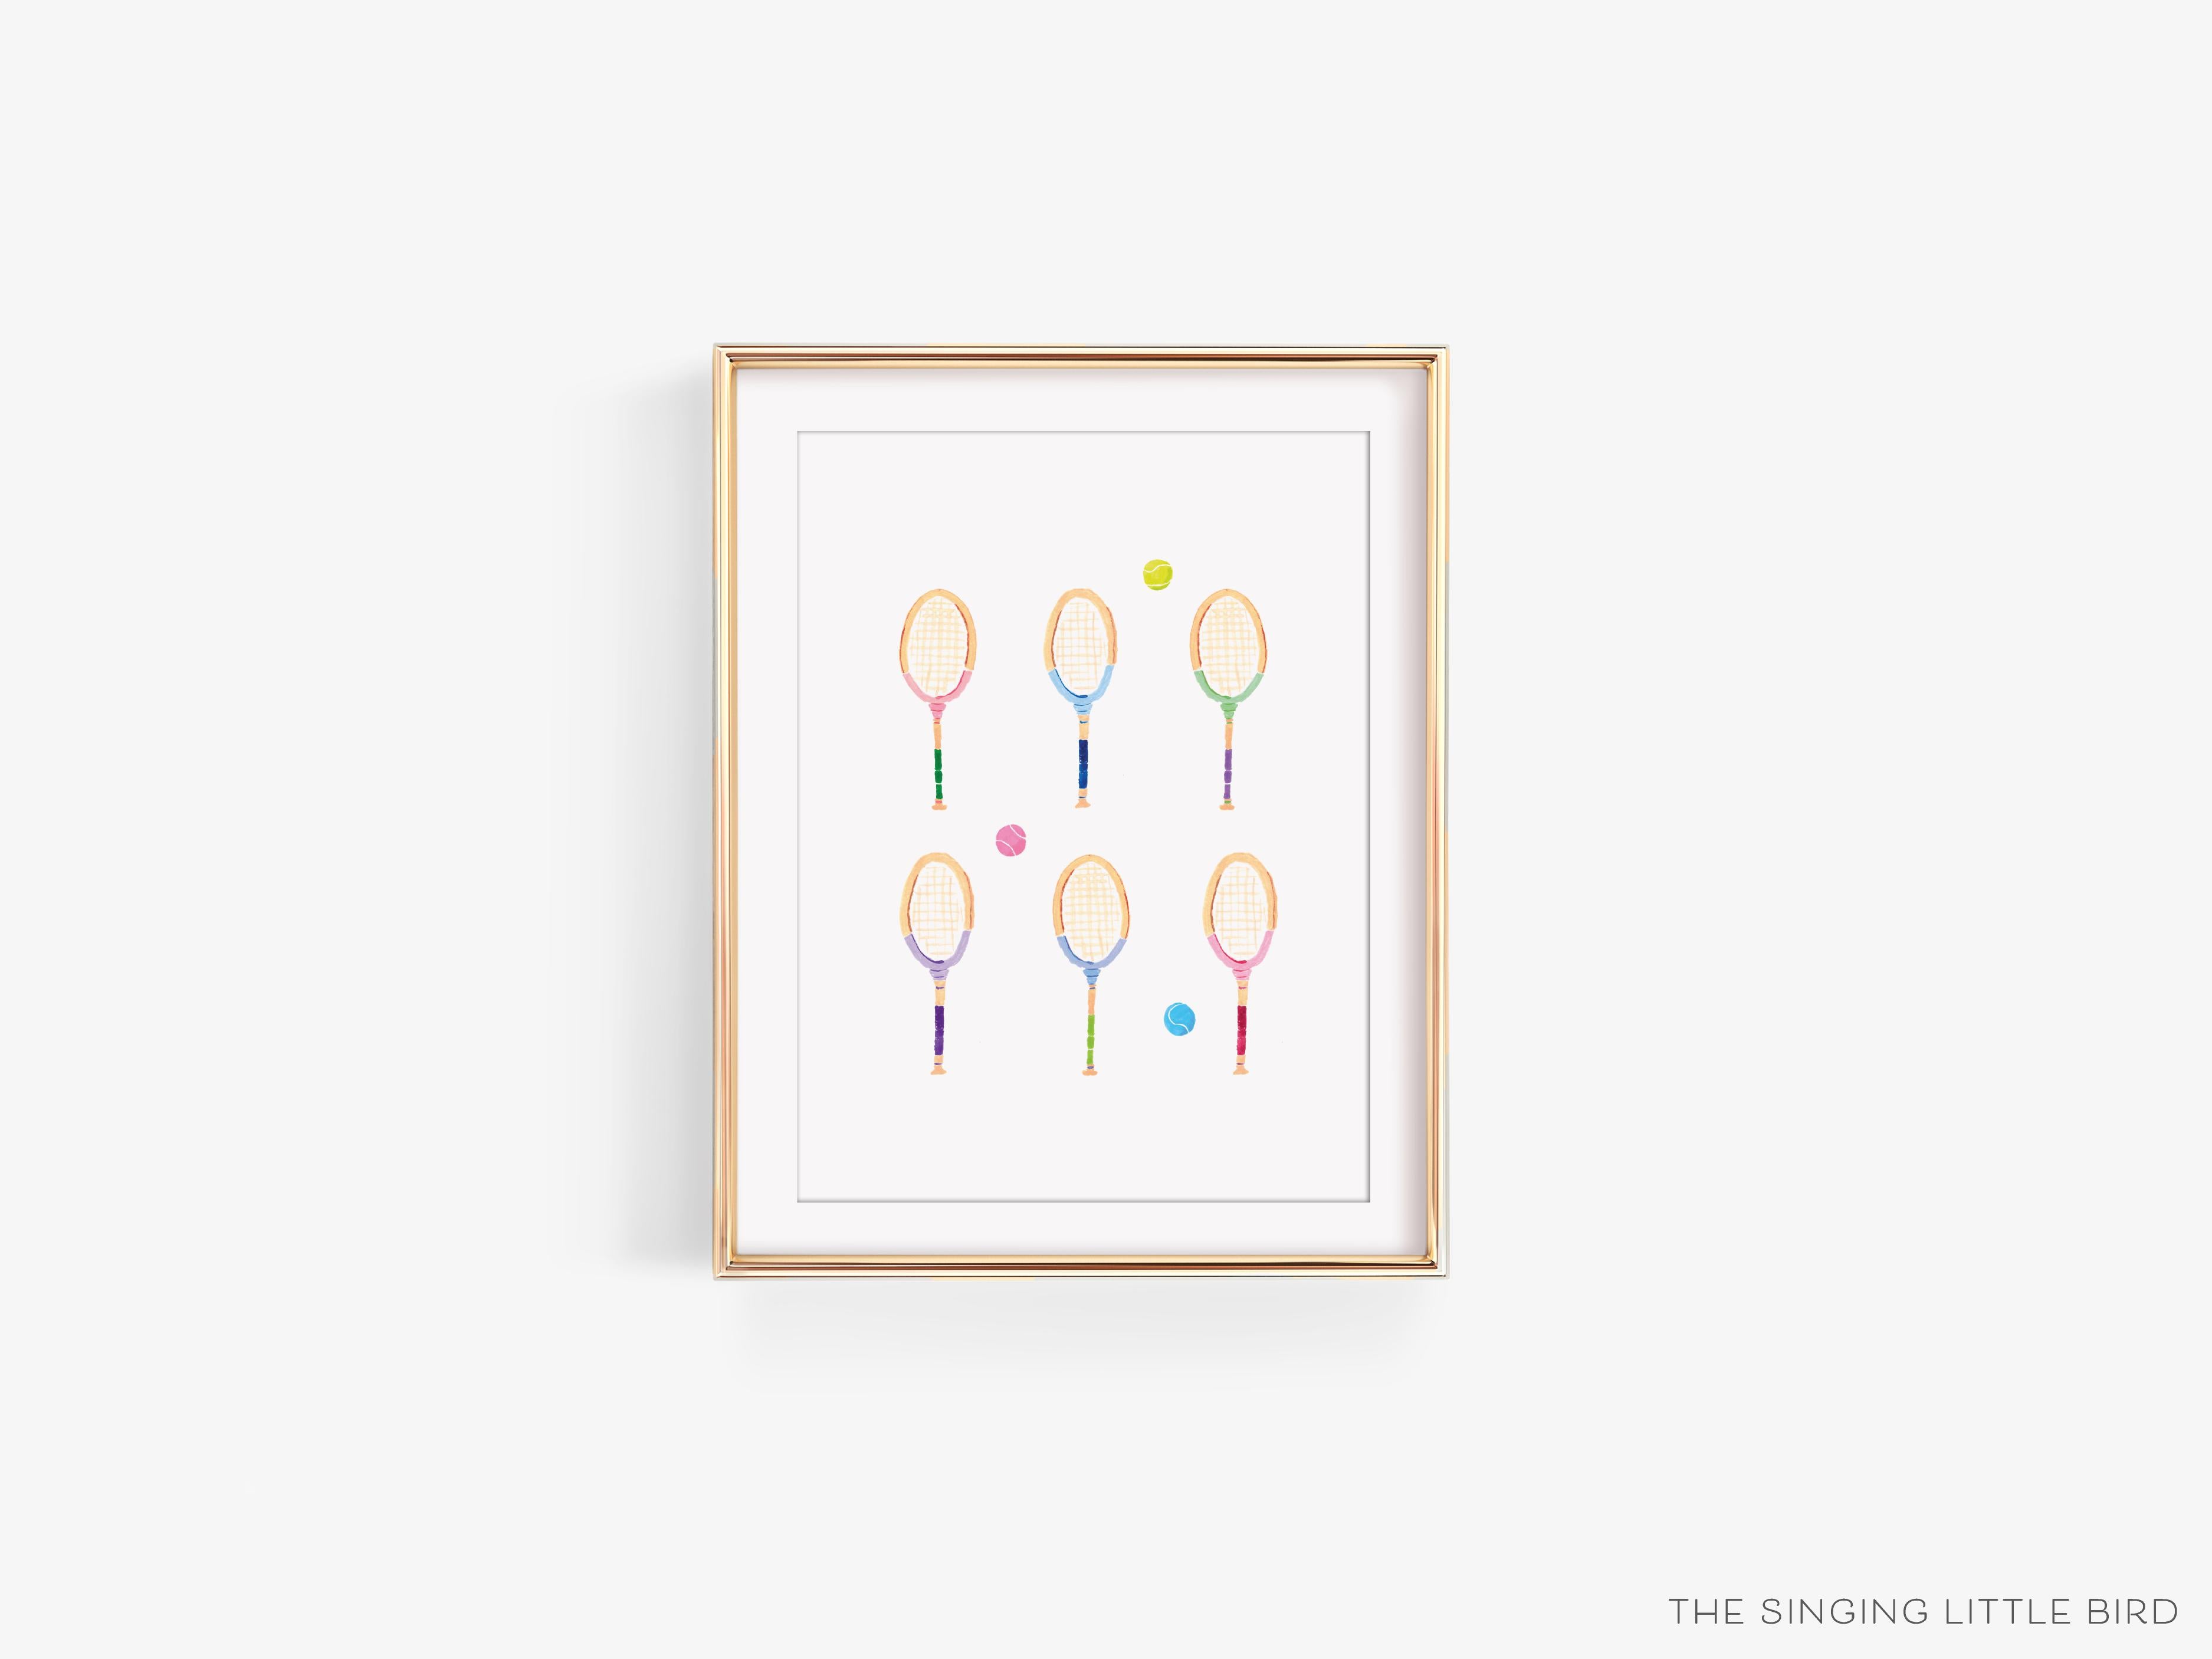 Tennis Racket Art Print-This watercolor art print features our hand-painted tennis rackets, printed in the USA on 120lb high quality art paper. This makes a great gift or wall decor for the tennis lover in your life.-The Singing Little Bird